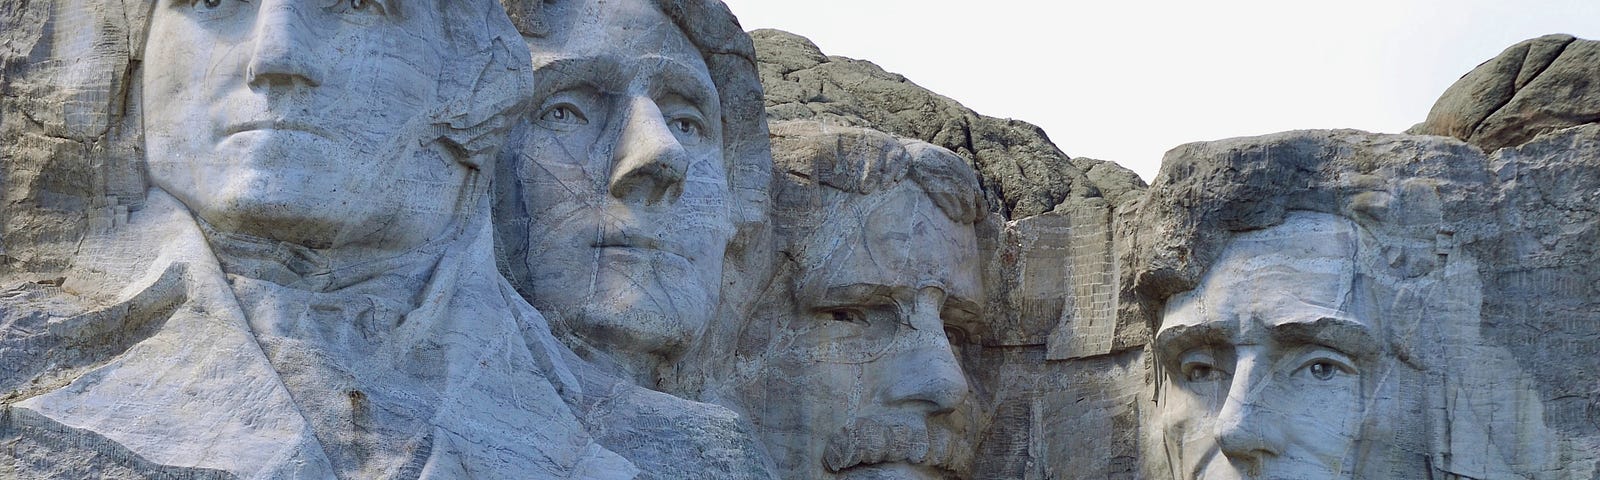 The carvings of US presidents on the face of Mount Rushmore